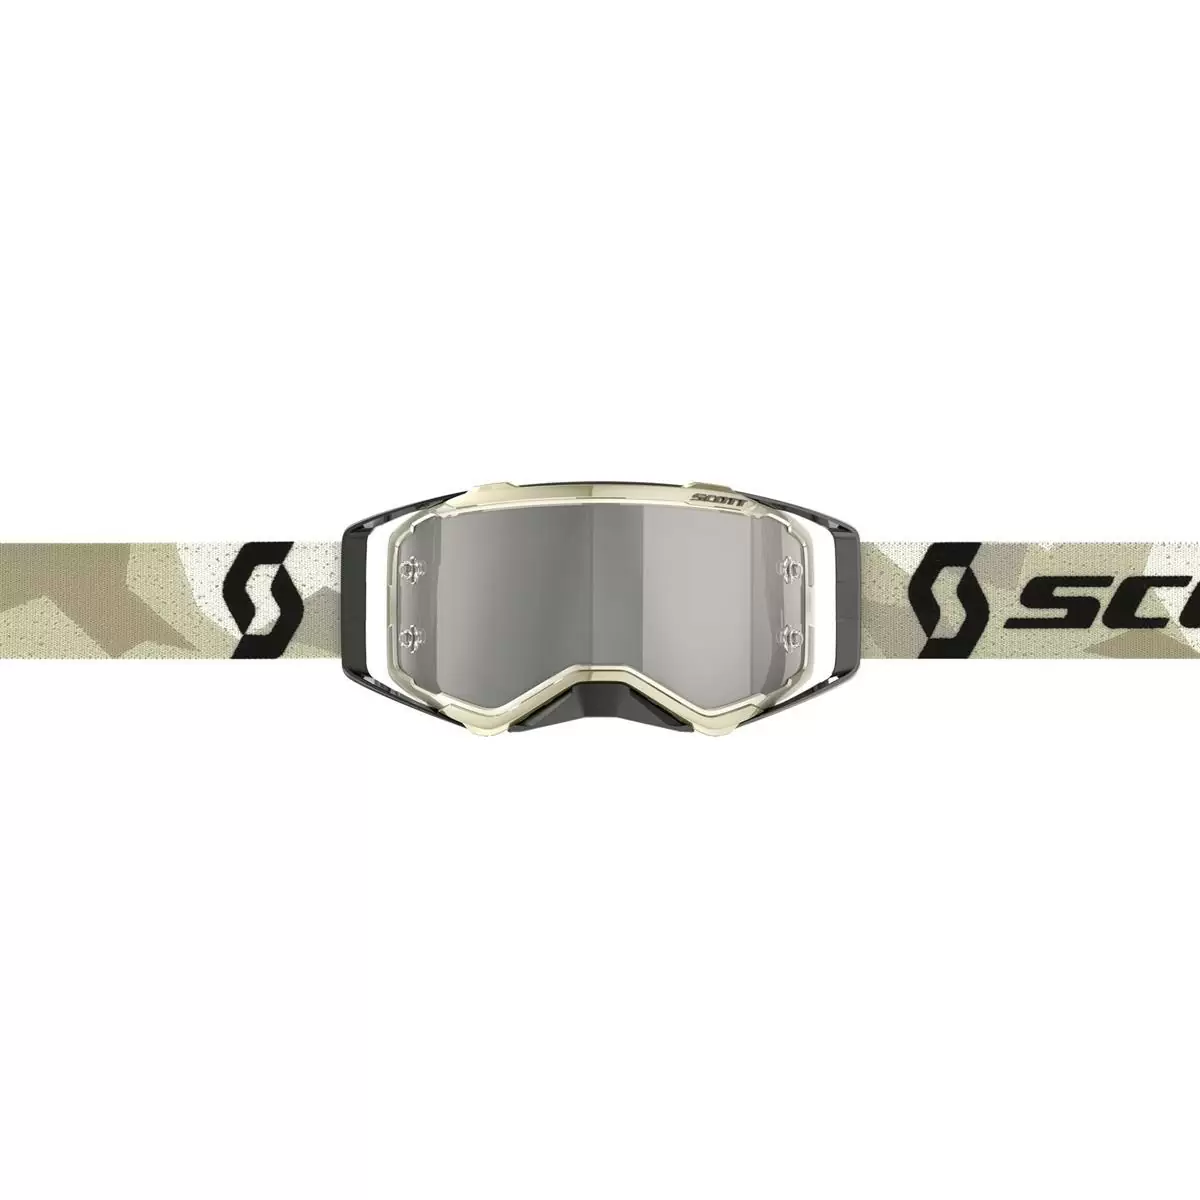 Prospect Mask Camo Beige/Black With Chrome Works Silver Lens #1